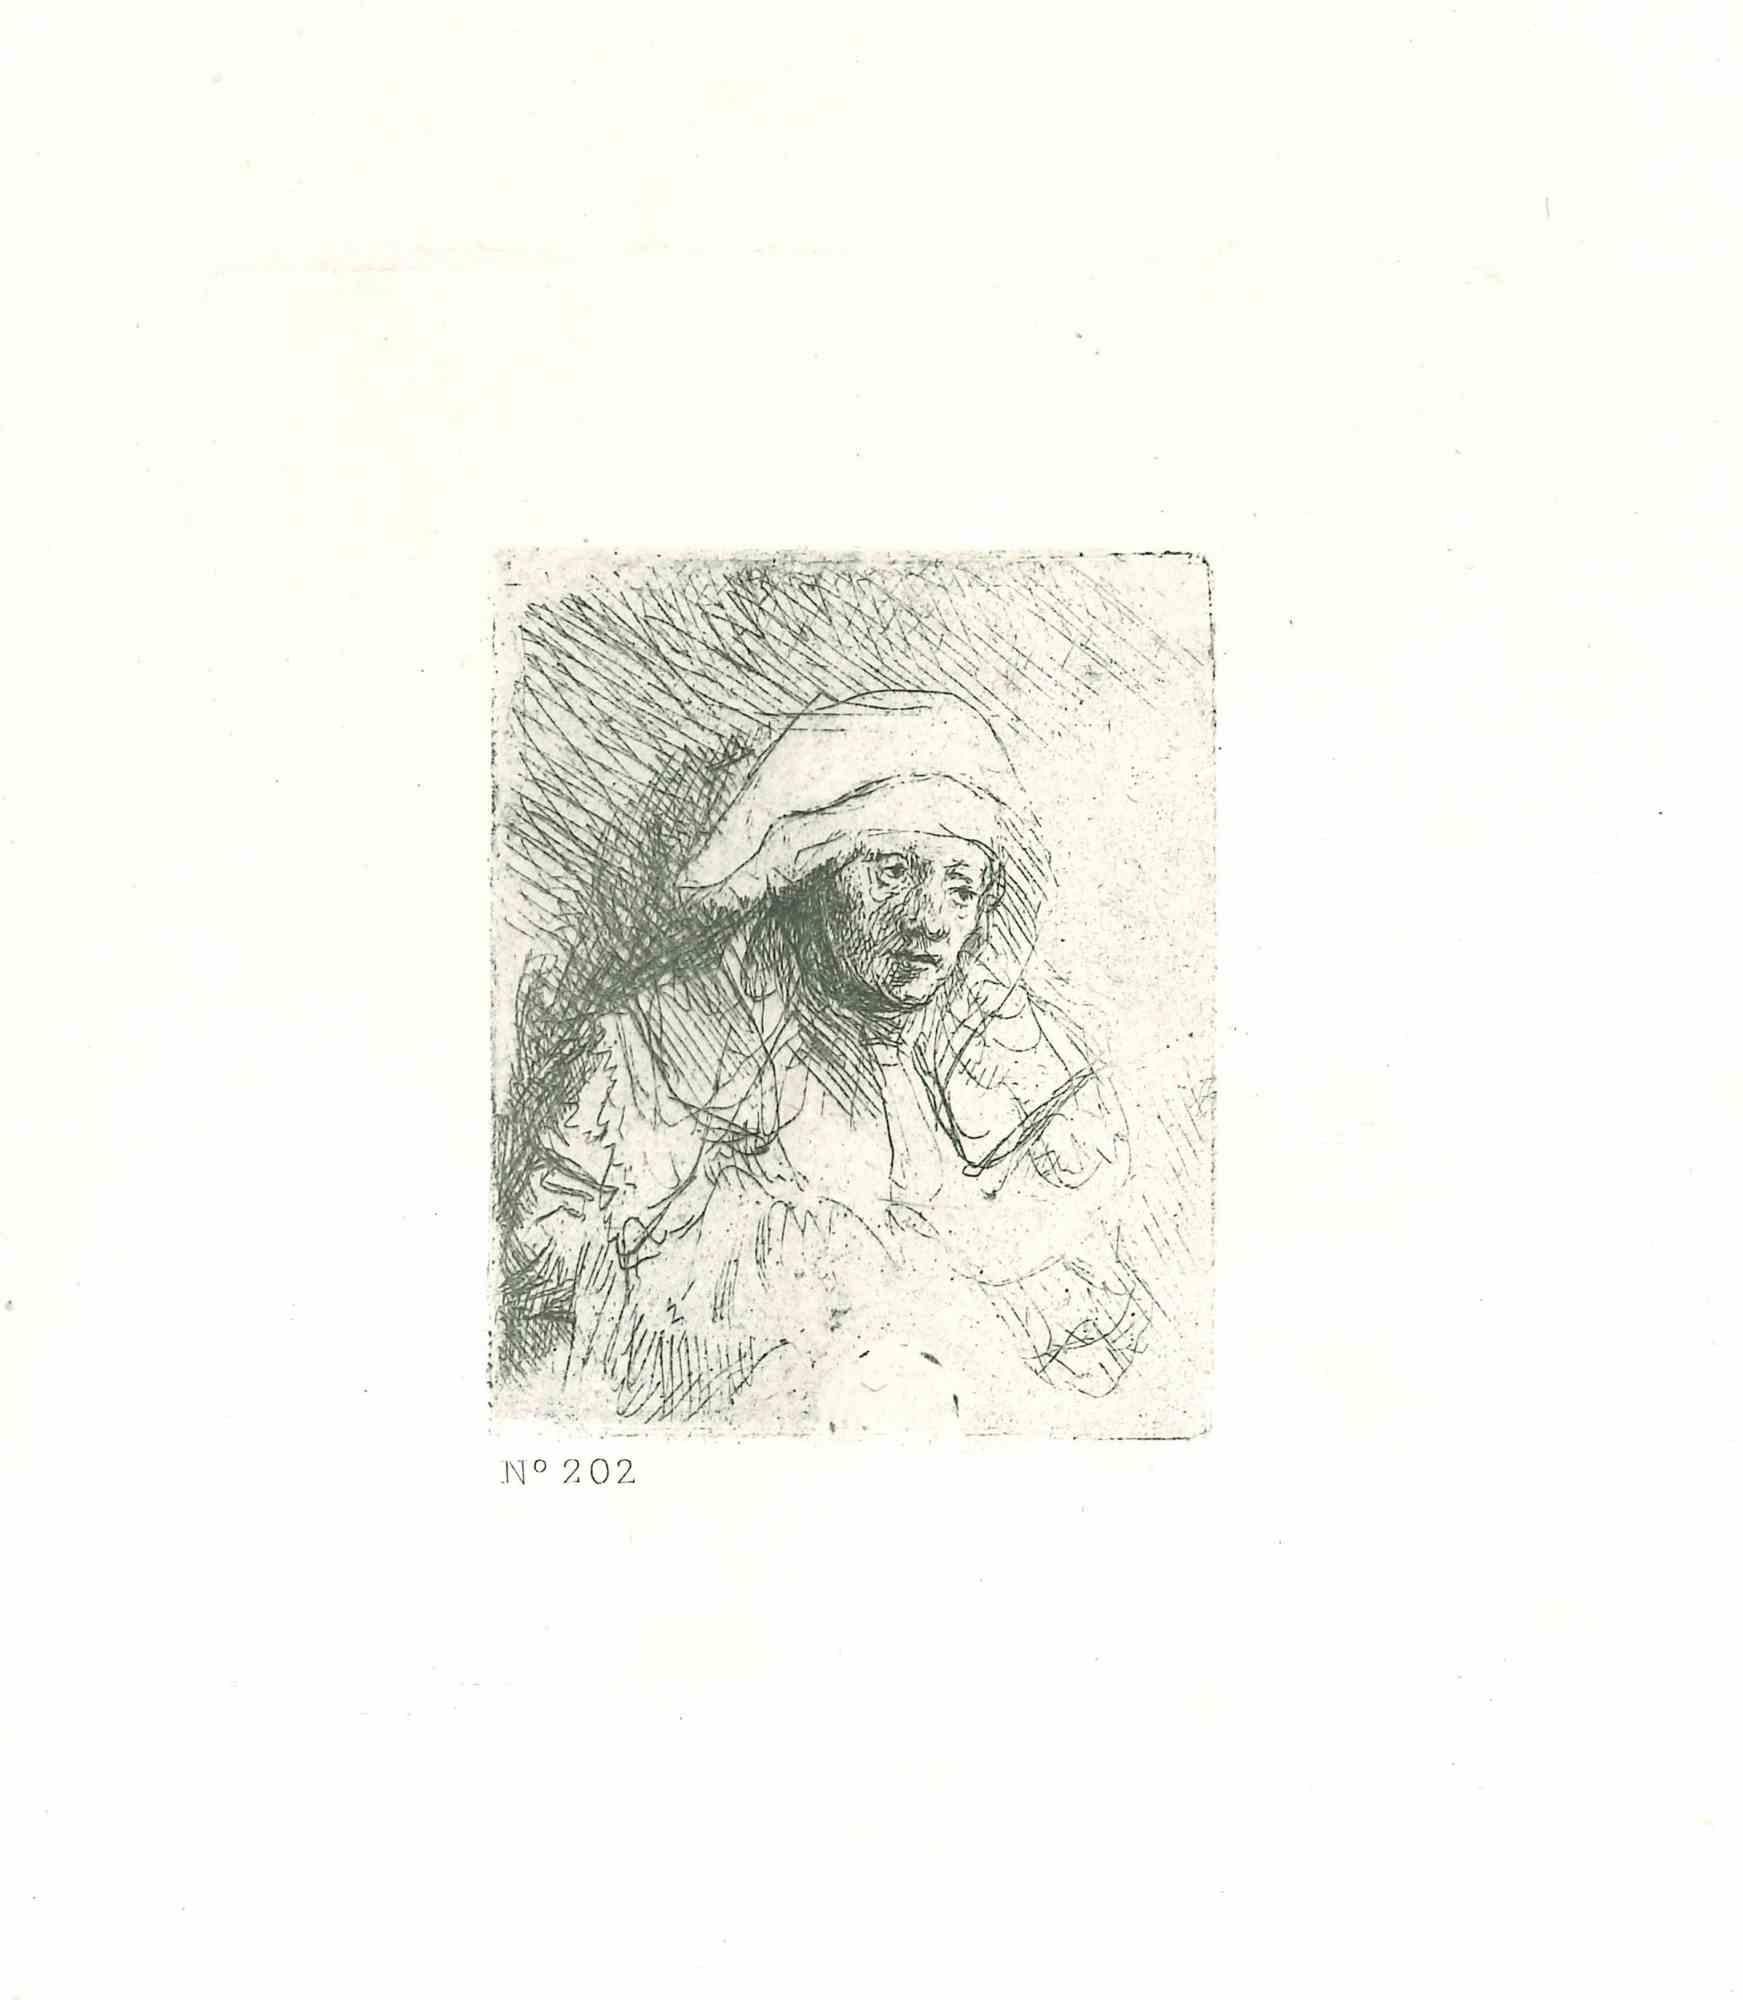 Sick Woman with a Large White Headdress - Engraving after Rembrandt - 19th Cent.